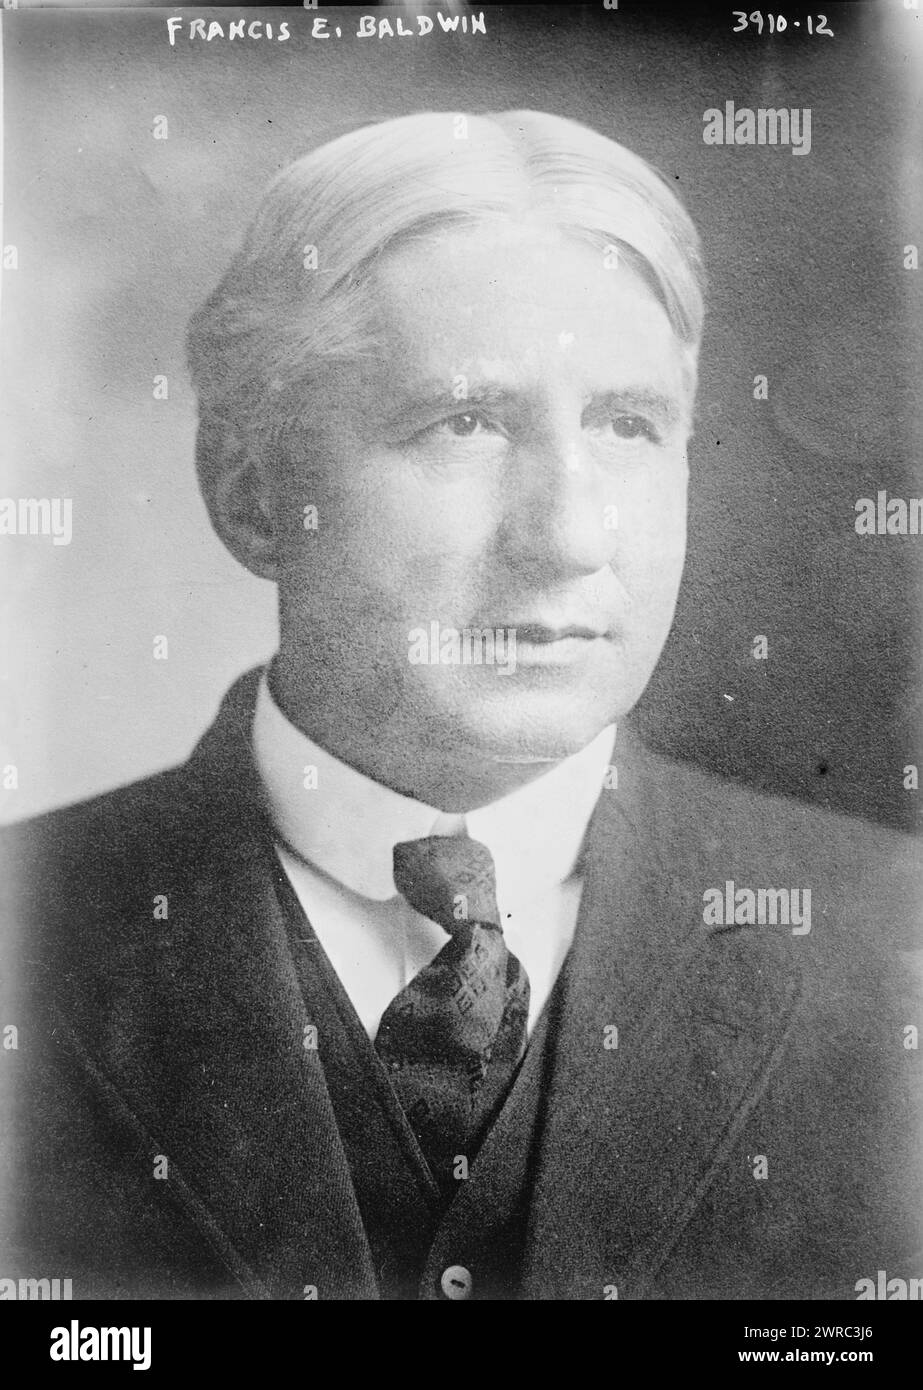 Francis E. Baldwin, Photograph shows Francis E. Baldwin (1859-1930), a Prohibition candidate for president in 1916 from Elmira, New York., between ca. 1915 and ca. 1920, Glass negatives, 1 negative: glass Stock Photo